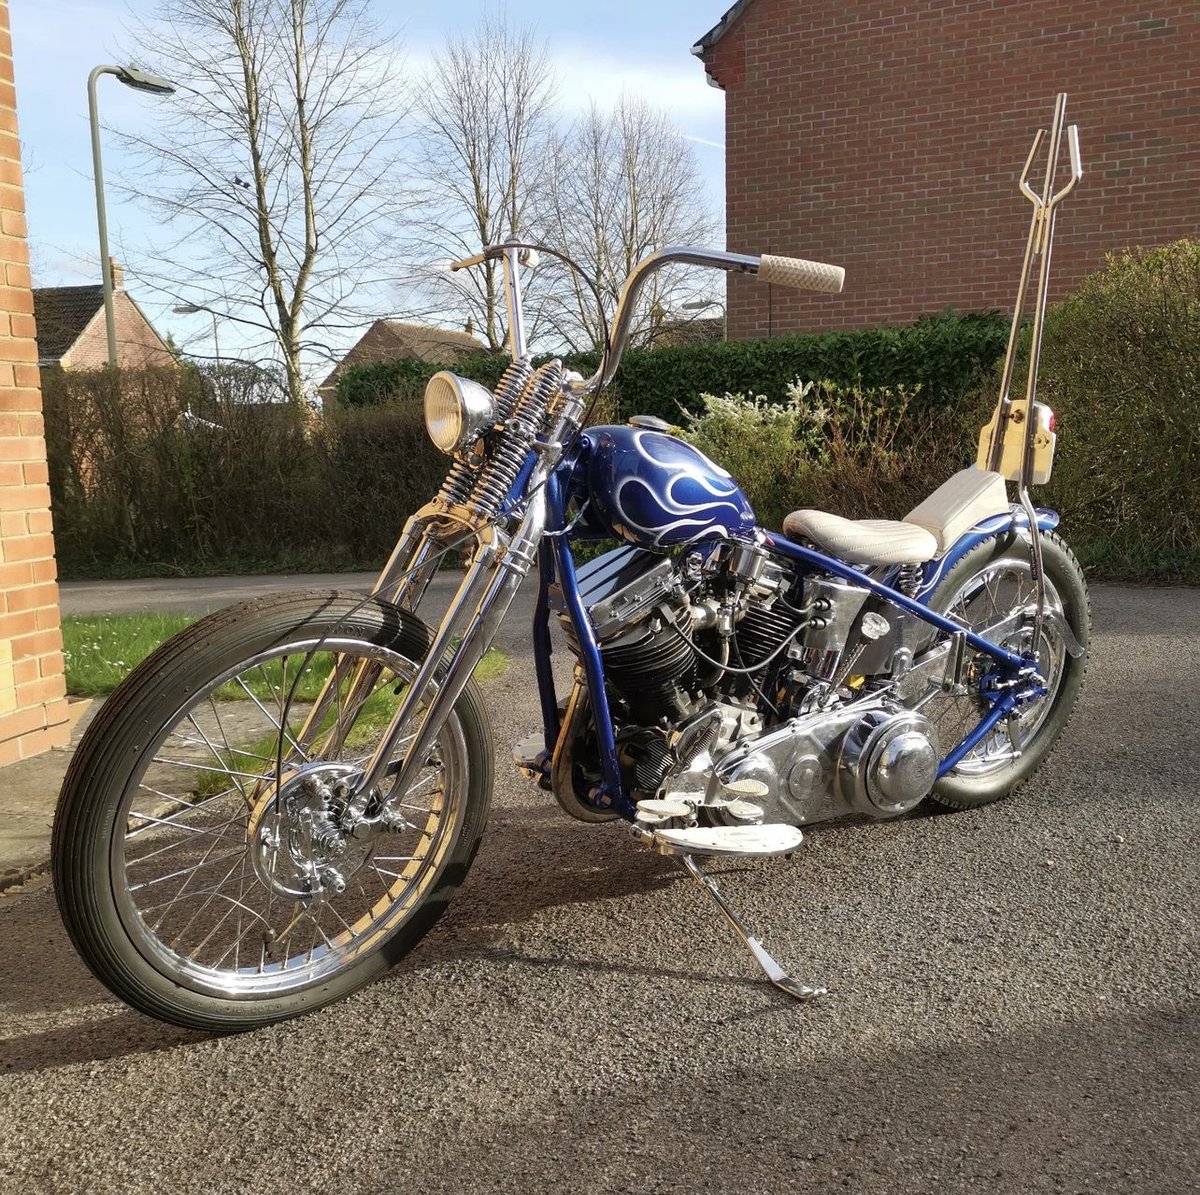 Panheads forever and ever. B-side with @jpintheuk #choppershit #panheadsforever #panheadchopper #chopitbuilditrideit #choppers #buildsomething #panhead #hd #harley #harleydavidson